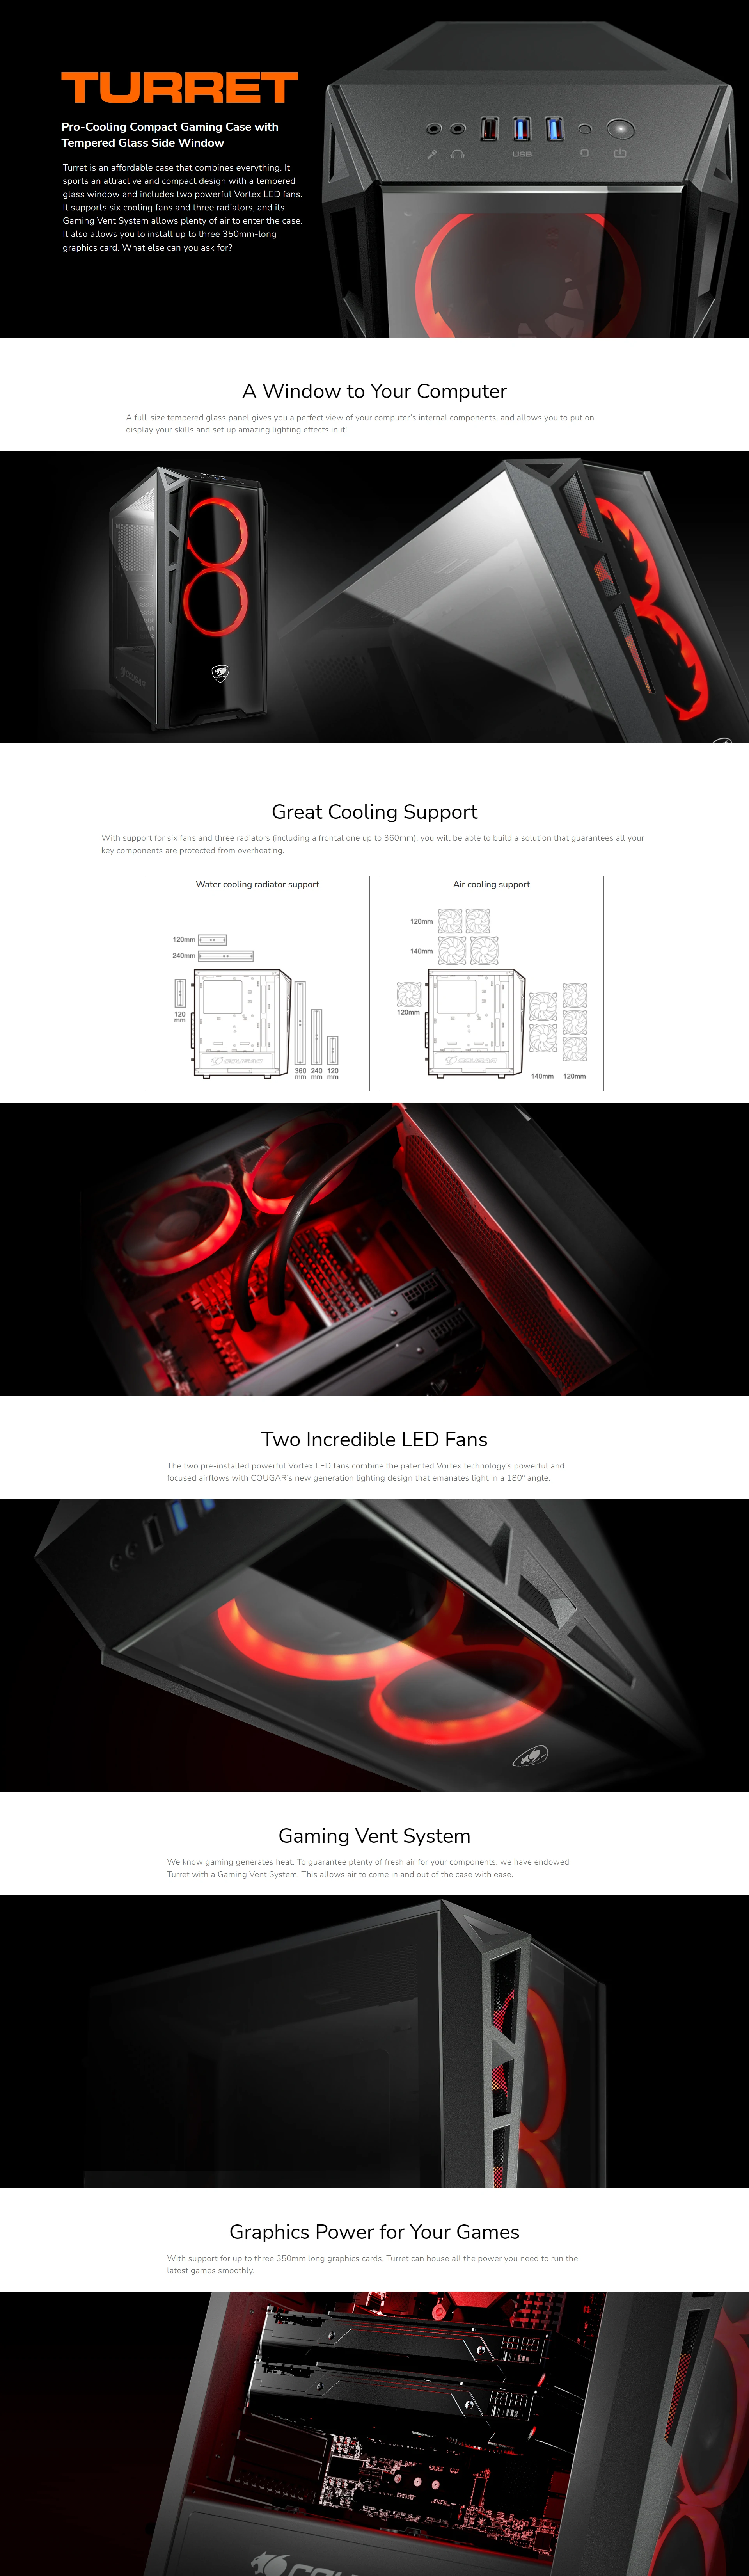 Overview - Cougar - Turret Pro-Cooling Compact Gaming Case with Tempered Glass Side Window